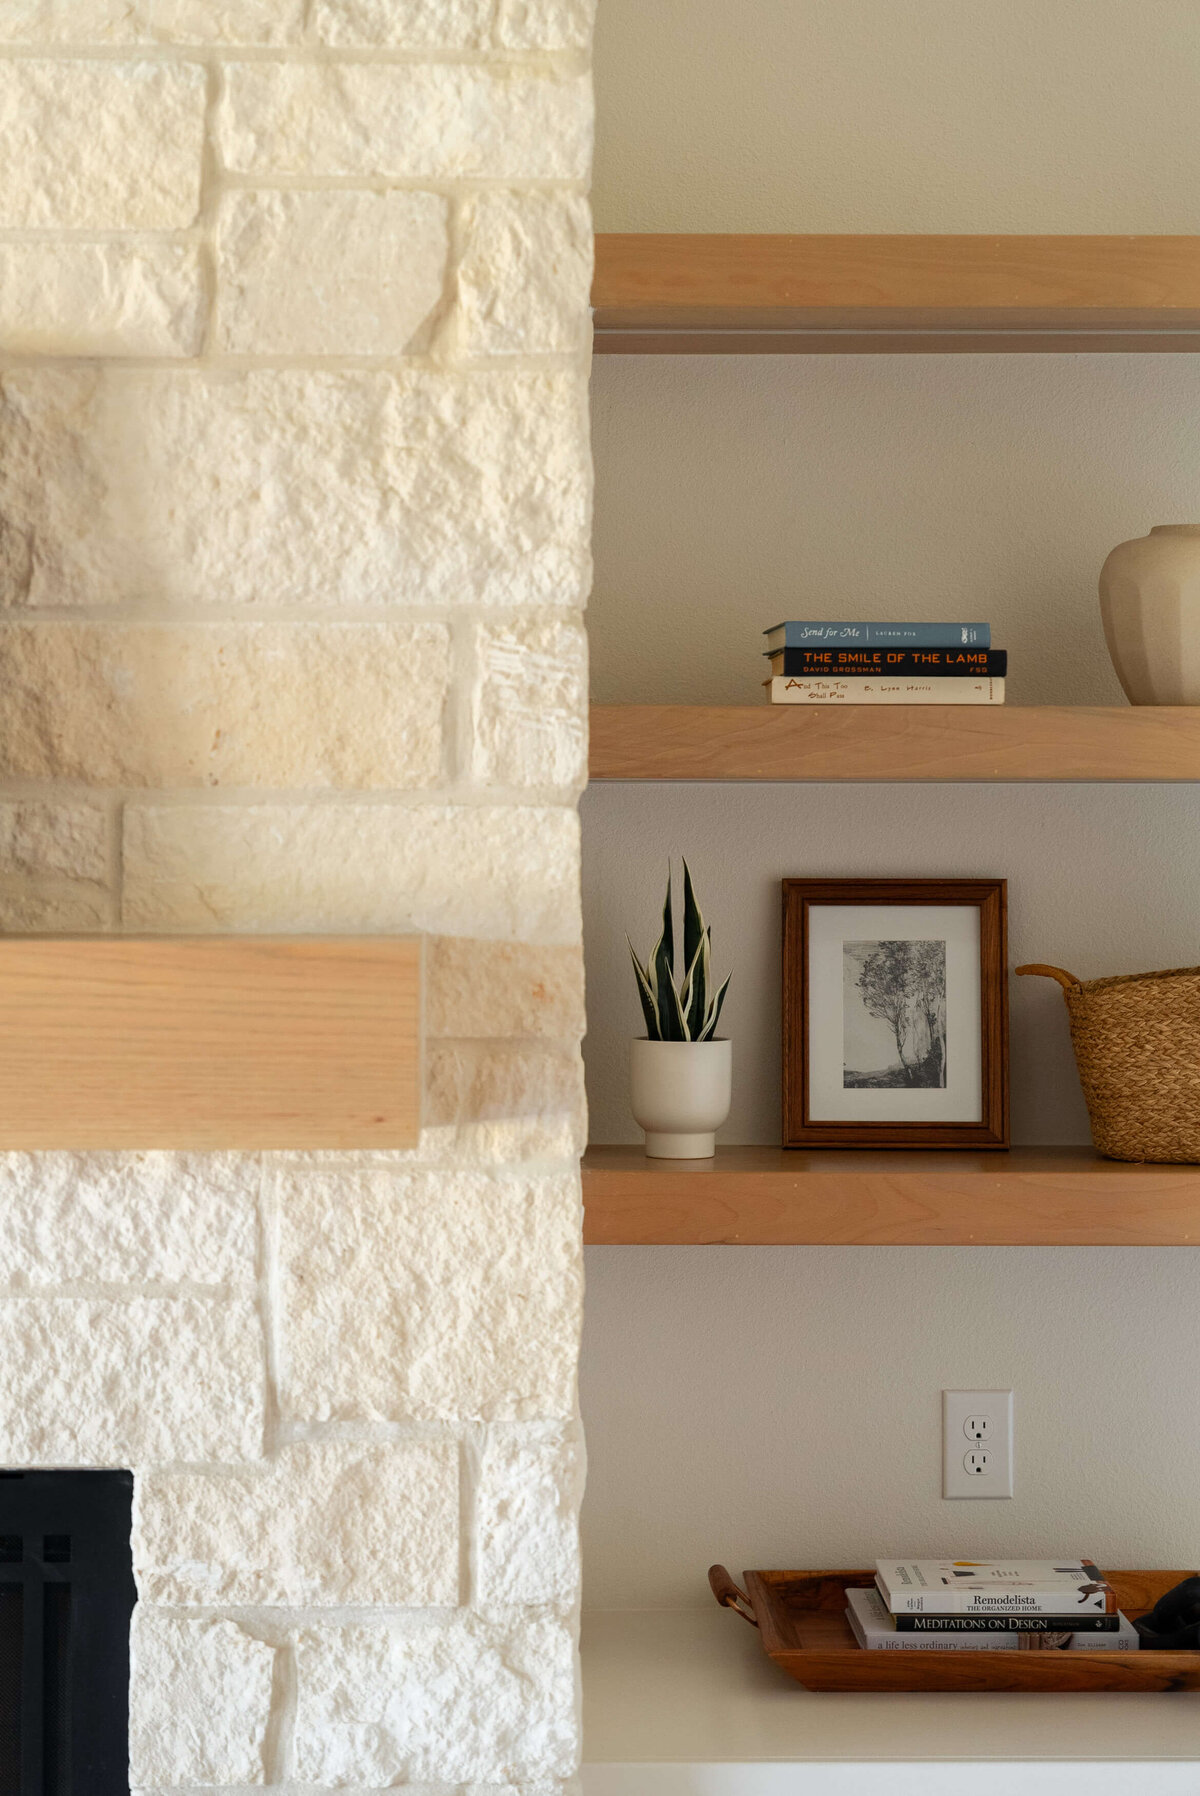 Stone fireplace with built-in shelves